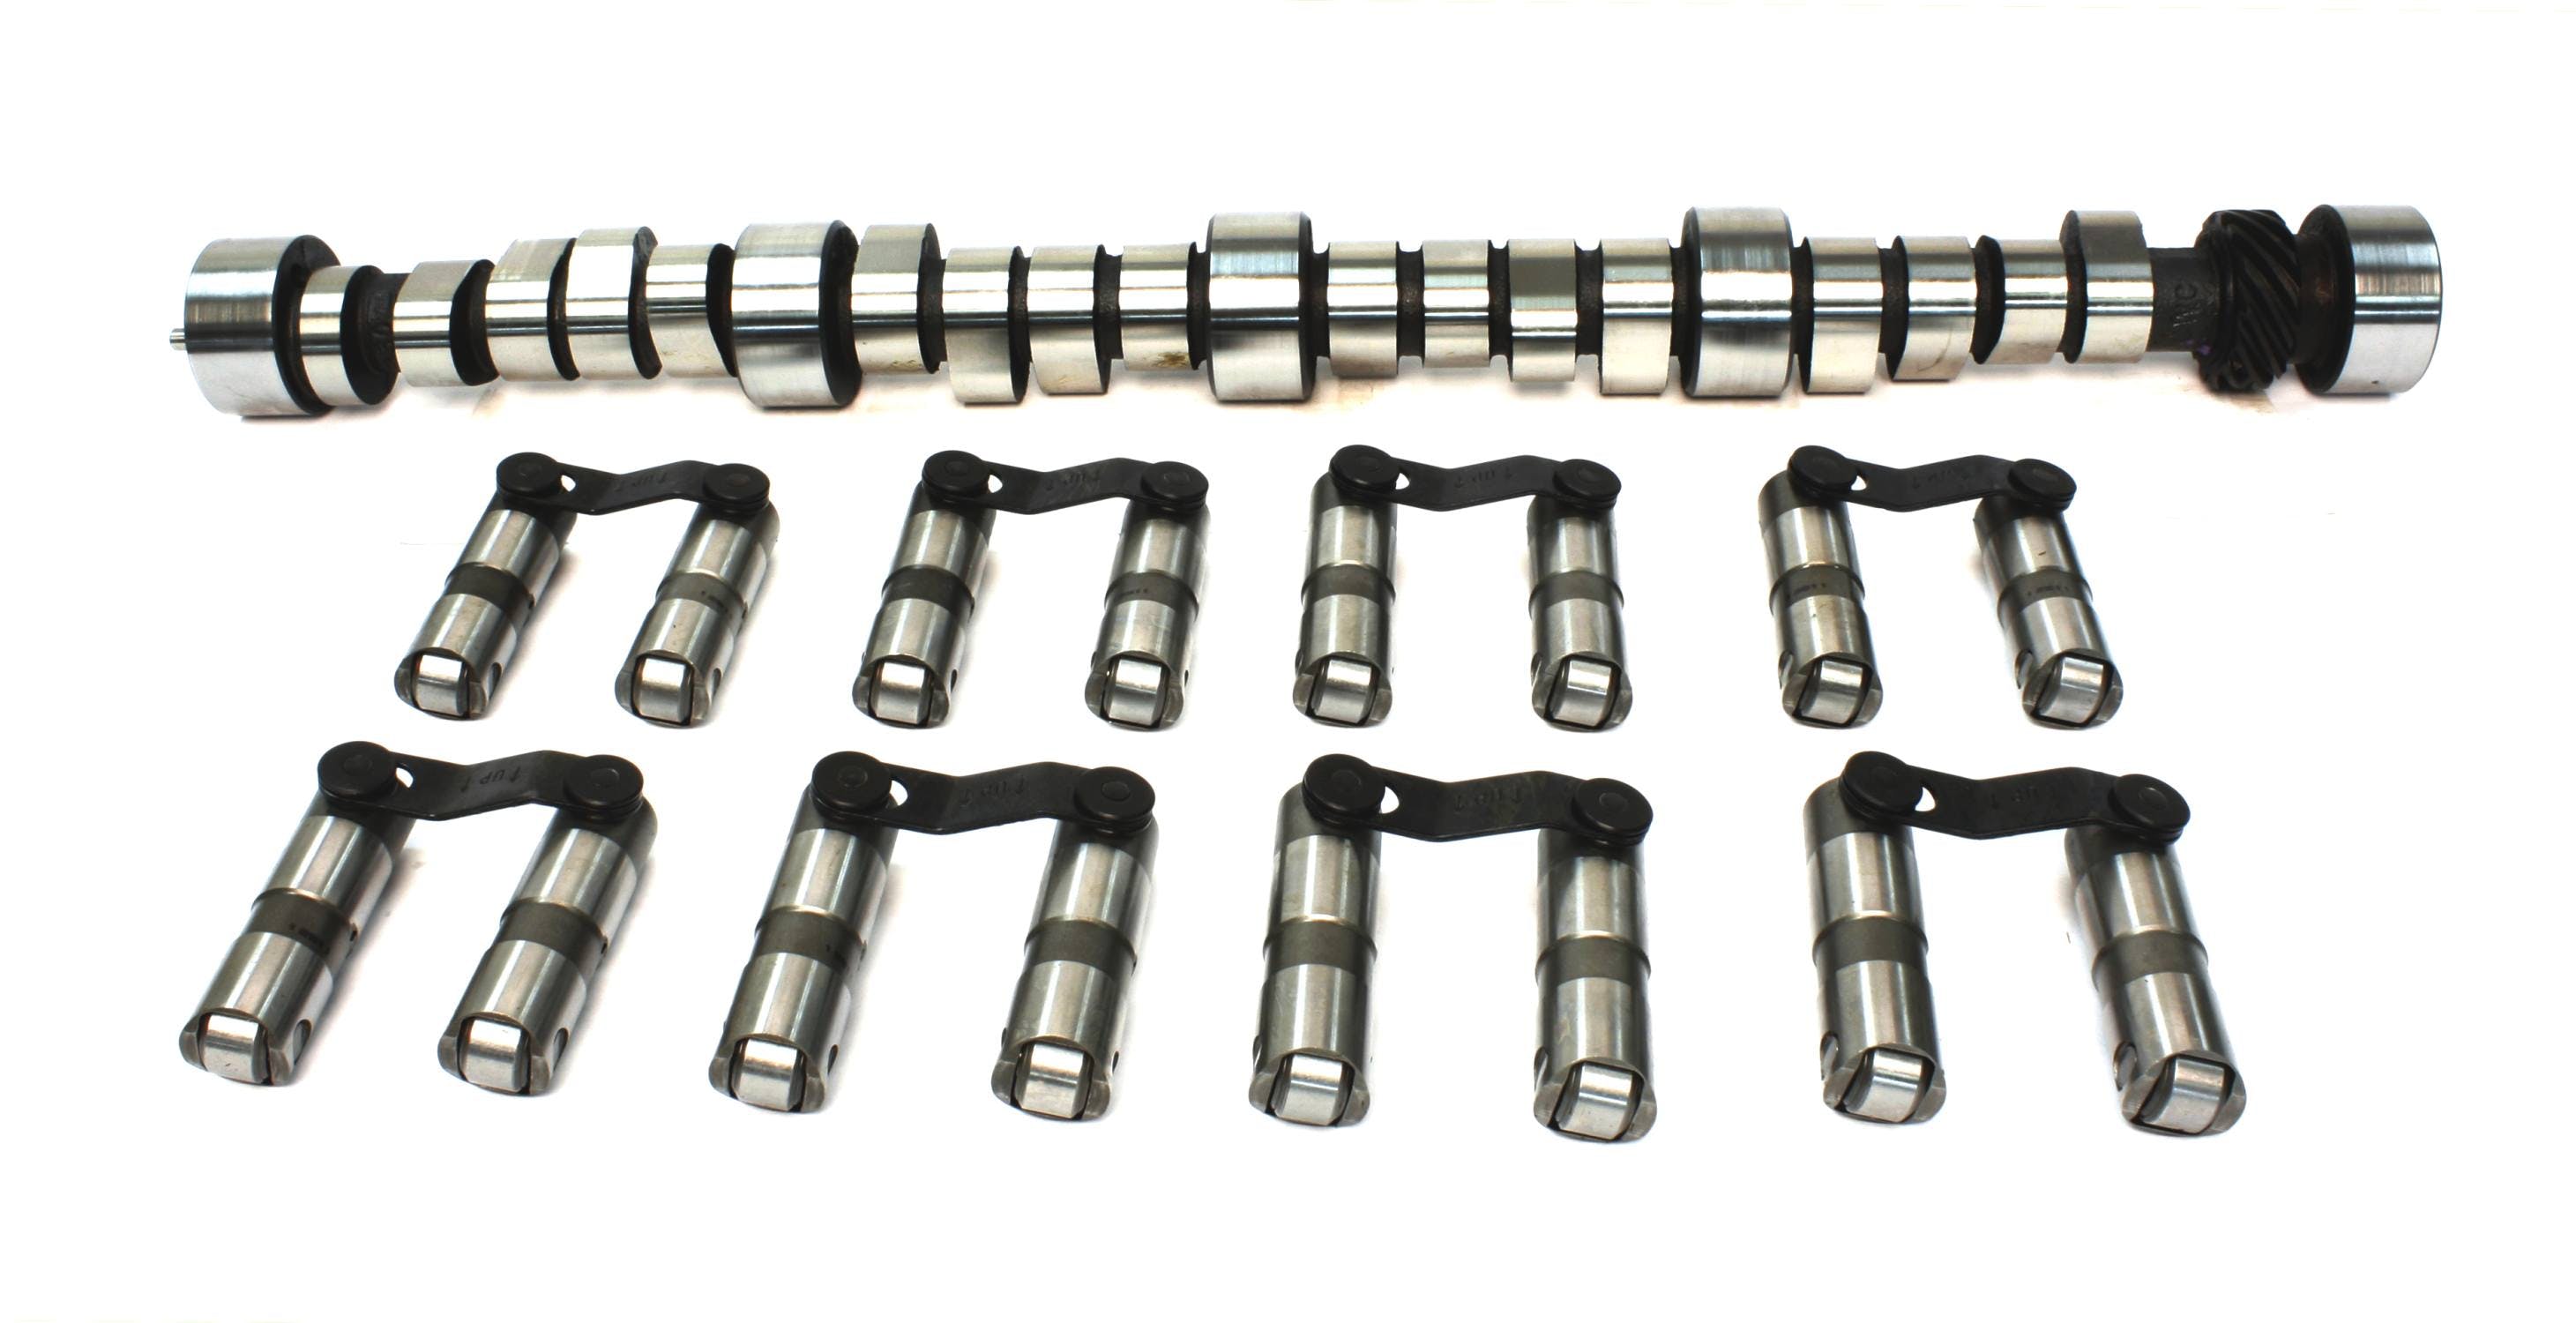 Competition Cams CL11-407-8 XE 200/206 HYDRAULIC ROLLER CAM/LIFTER KIT CHEVROLET BIG BLOCK 396-454